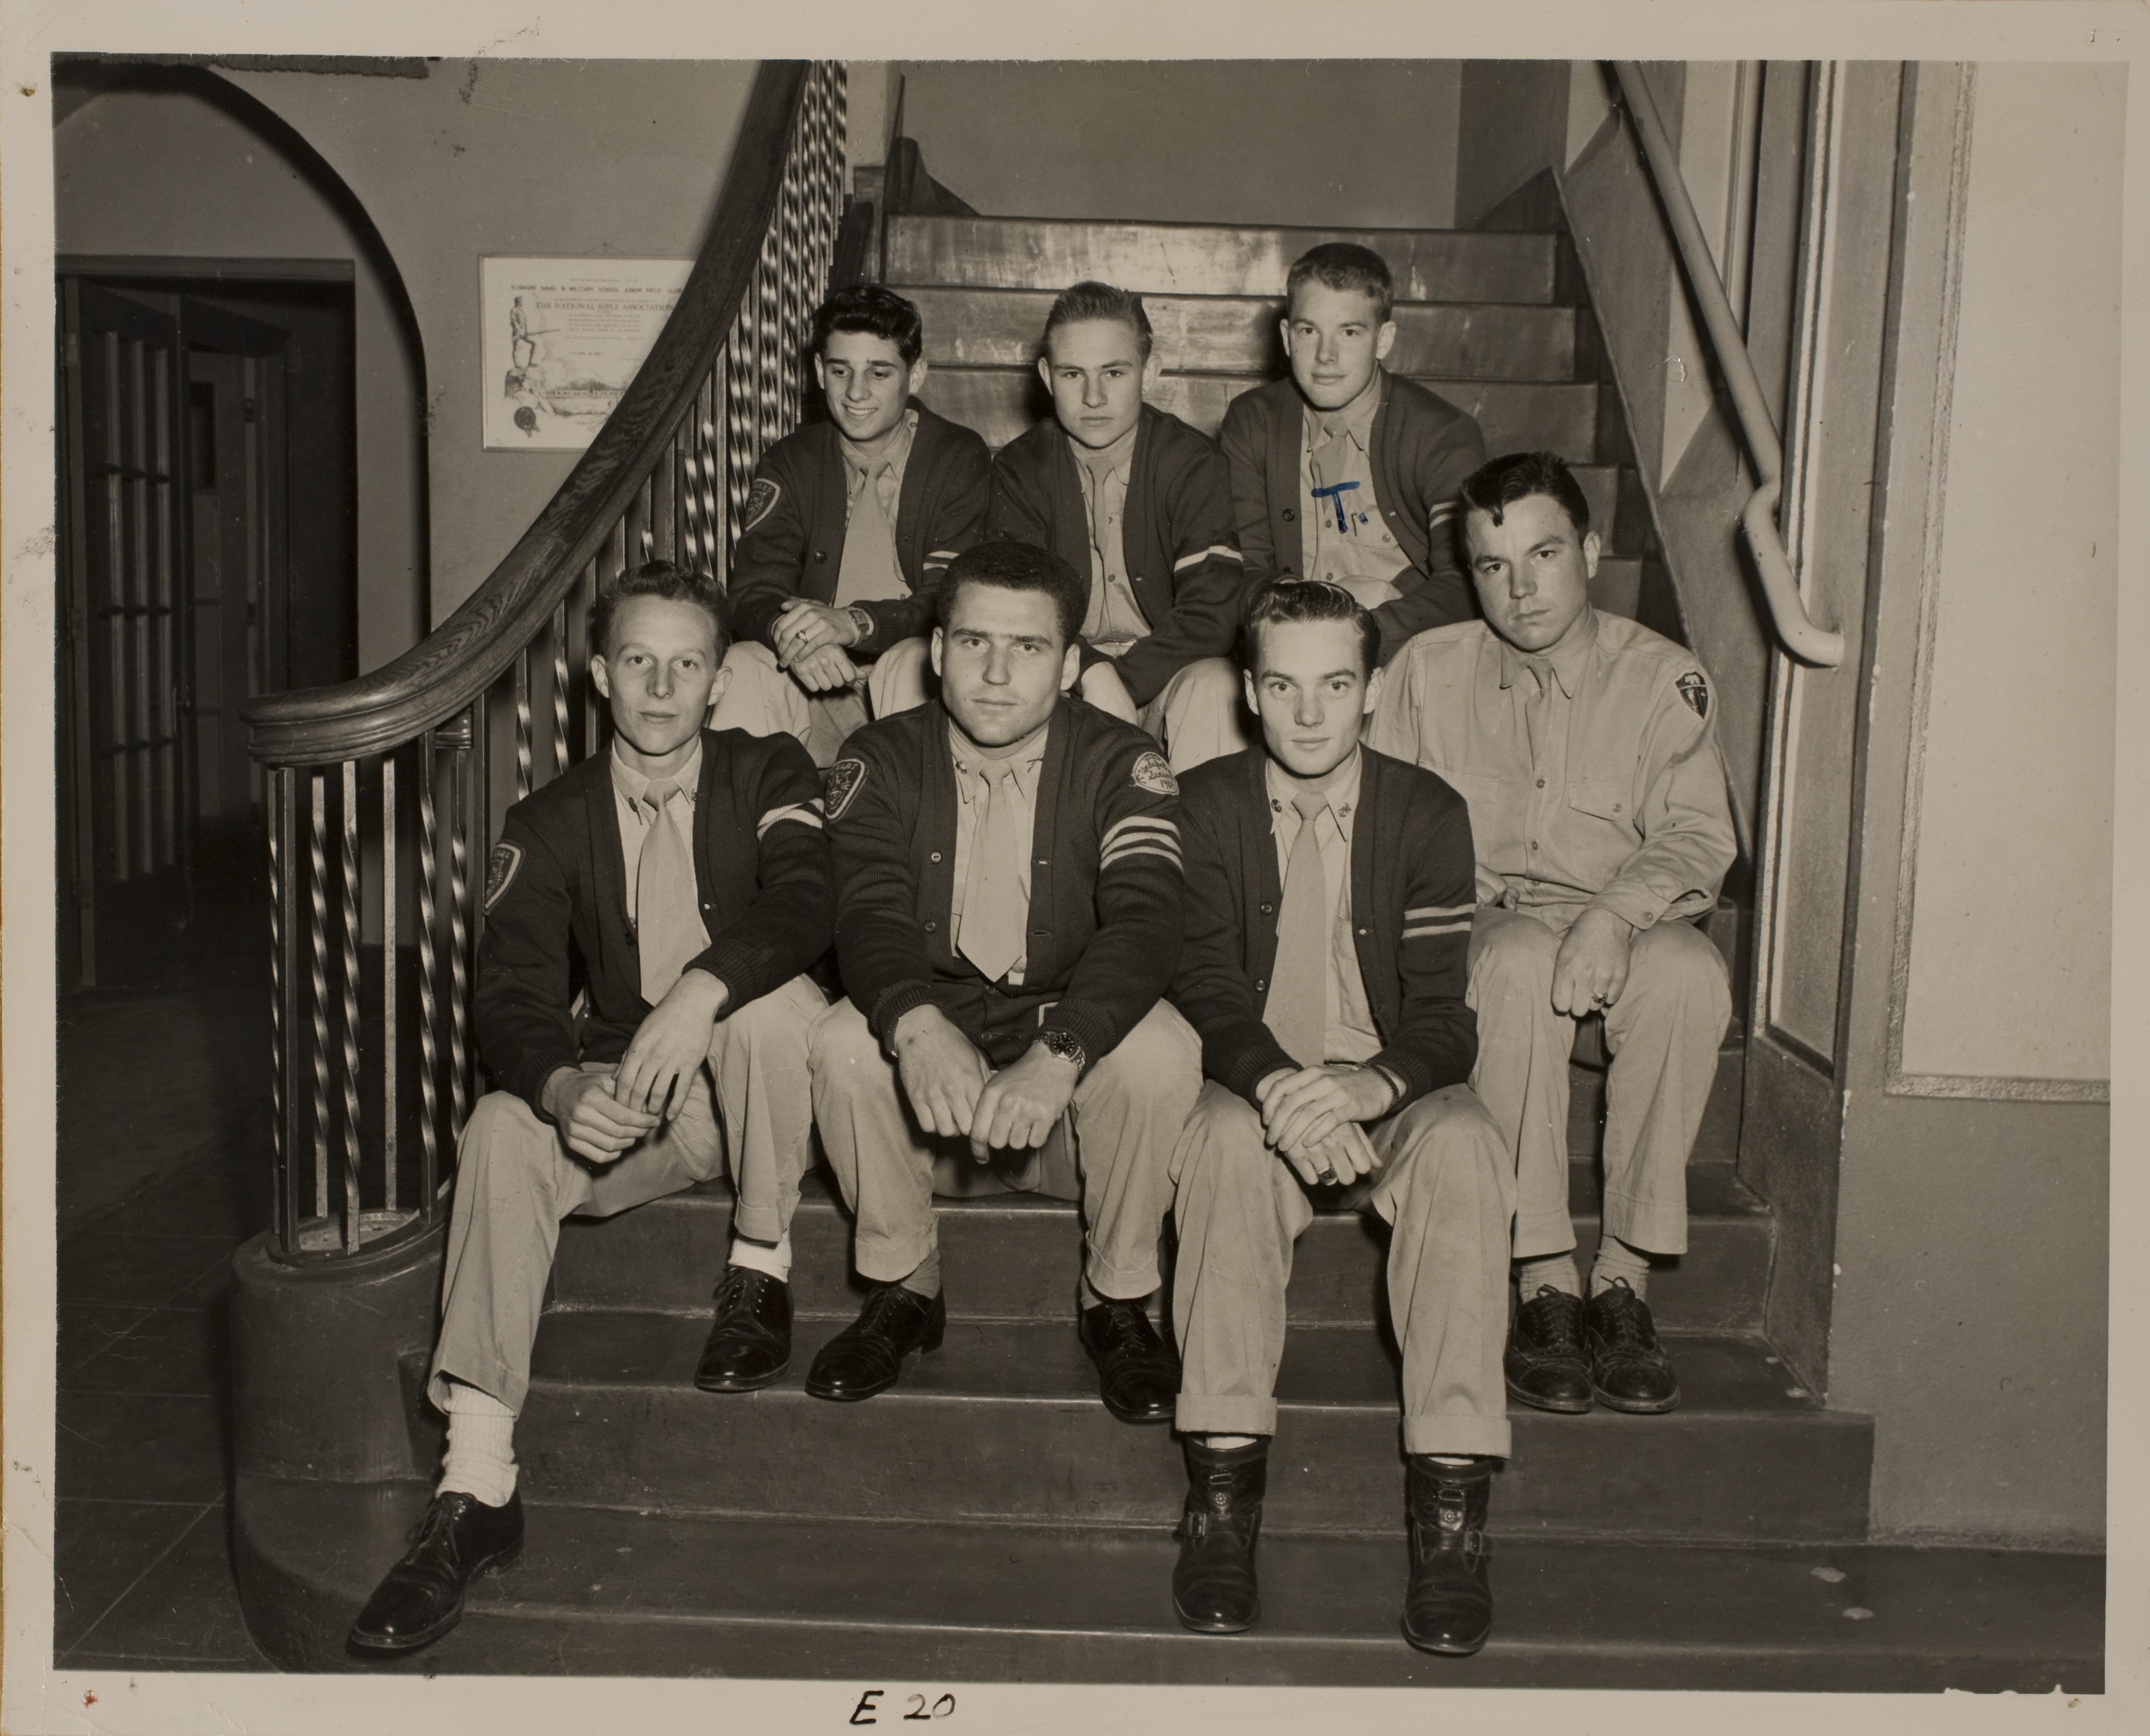 Rex Anthony Bell, Jr. (second row on the right) at Elsinore Naval and Military School Private School in  Lake Elsinore, California: photographic print